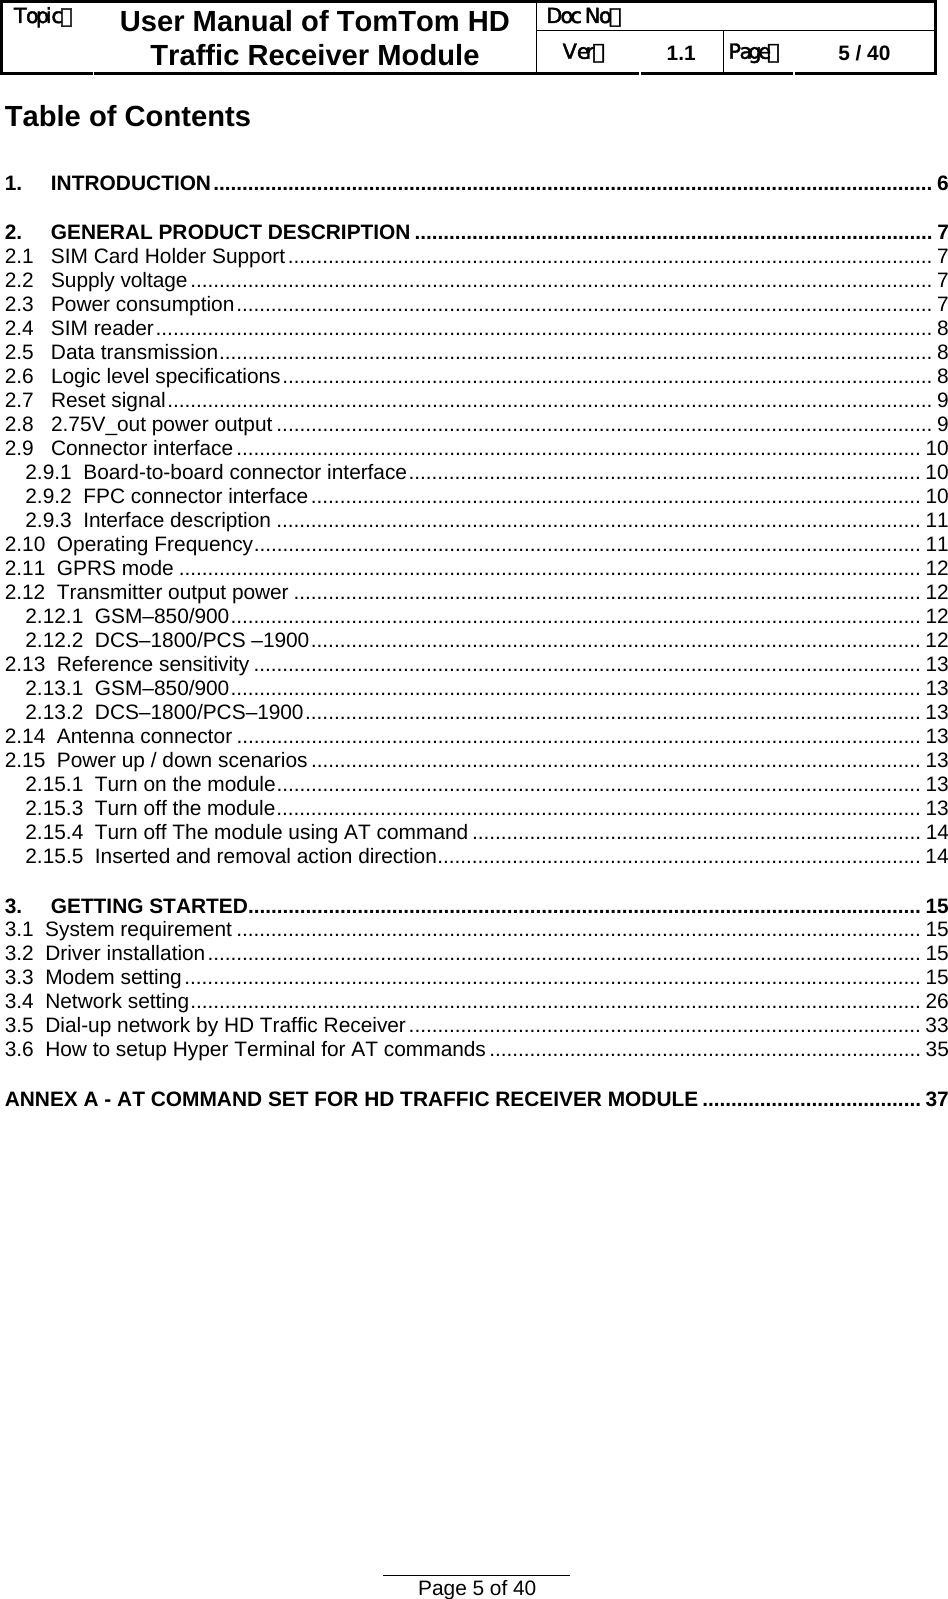 Doc No：  Topic：  User Manual of TomTom HD Traffic Receiver Module  Ver：  1.1  Page：  5 / 40  Page 5 of 40  Table of Contents 1.     INTRODUCTION............................................................................................................................. 6 2.     GENERAL PRODUCT DESCRIPTION .......................................................................................... 7 2.1   SIM Card Holder Support................................................................................................................ 7 2.2   Supply voltage................................................................................................................................. 7 2.3   Power consumption......................................................................................................................... 7 2.4   SIM reader....................................................................................................................................... 8 2.5   Data transmission............................................................................................................................ 8 2.6   Logic level specifications................................................................................................................. 8 2.7   Reset signal..................................................................................................................................... 9 2.8   2.75V_out power output .................................................................................................................. 9 2.9   Connector interface ....................................................................................................................... 10 2.9.1  Board-to-board connector interface......................................................................................... 10 2.9.2  FPC connector interface.......................................................................................................... 10 2.9.3  Interface description ................................................................................................................ 11 2.10  Operating Frequency.................................................................................................................... 11 2.11  GPRS mode ................................................................................................................................. 12 2.12  Transmitter output power ............................................................................................................. 12 2.12.1  GSM–850/900........................................................................................................................ 12 2.12.2  DCS–1800/PCS –1900.......................................................................................................... 12 2.13  Reference sensitivity .................................................................................................................... 13 2.13.1  GSM–850/900........................................................................................................................ 13 2.13.2  DCS–1800/PCS–1900........................................................................................................... 13 2.14  Antenna connector ....................................................................................................................... 13 2.15  Power up / down scenarios .......................................................................................................... 13 2.15.1  Turn on the module................................................................................................................ 13 2.15.3  Turn off the module................................................................................................................ 13 2.15.4  Turn off The module using AT command .............................................................................. 14 2.15.5  Inserted and removal action direction.................................................................................... 14 3.     GETTING STARTED..................................................................................................................... 15 3.1  System requirement ....................................................................................................................... 15 3.2  Driver installation............................................................................................................................ 15 3.3  Modem setting................................................................................................................................ 15 3.4  Network setting............................................................................................................................... 26 3.5  Dial-up network by HD Traffic Receiver......................................................................................... 33 3.6  How to setup Hyper Terminal for AT commands ........................................................................... 35 ANNEX A - AT COMMAND SET FOR HD TRAFFIC RECEIVER MODULE ...................................... 37  